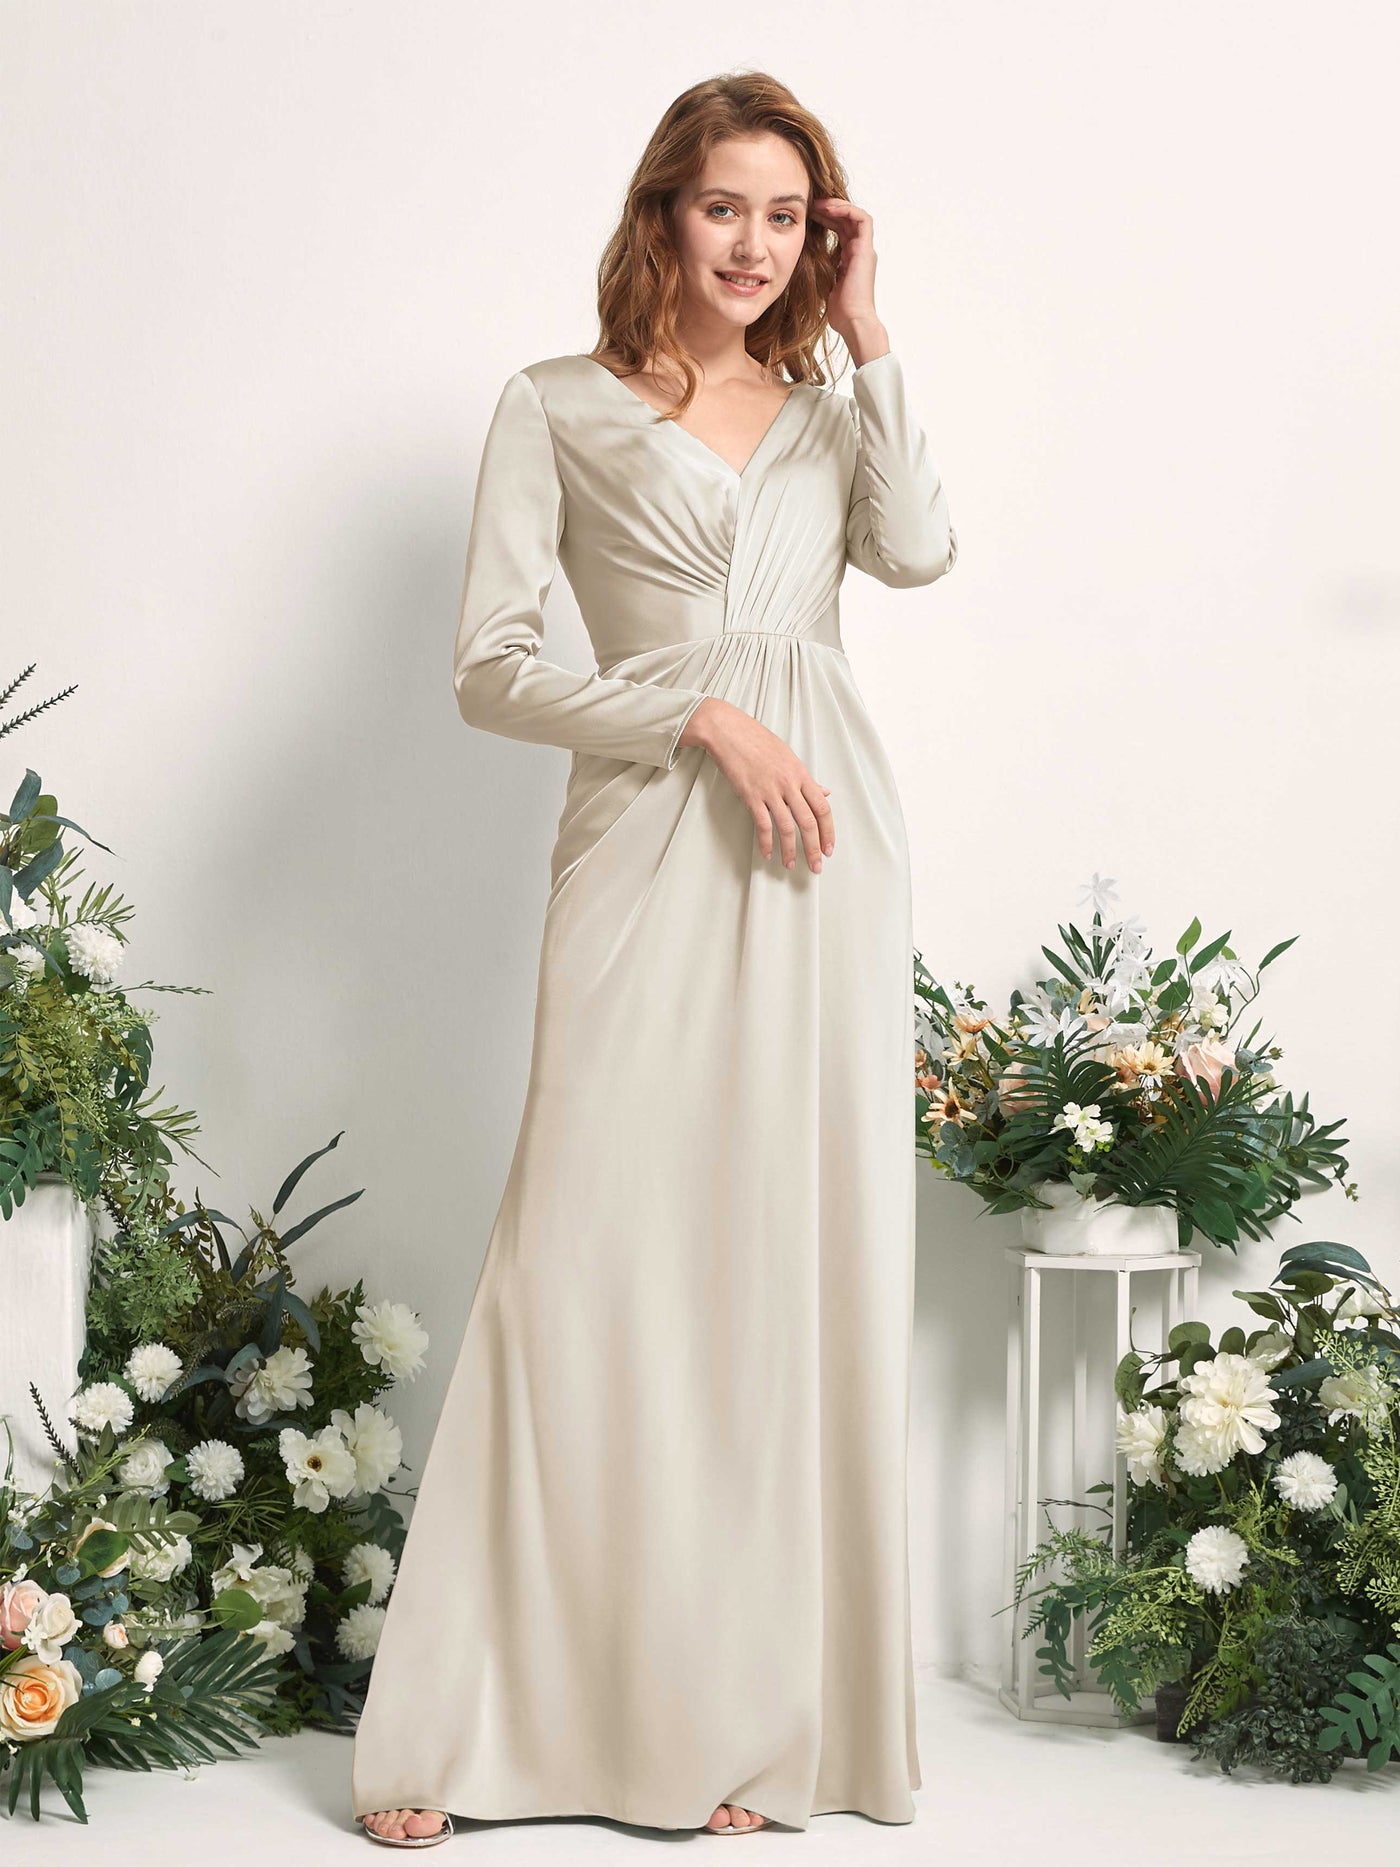 Champagne Bridesmaid Dresses Bridesmaid Dress A-line Satin V-neck Full Length Long Sleeves Wedding Party Dress (80225804)#color_champagne